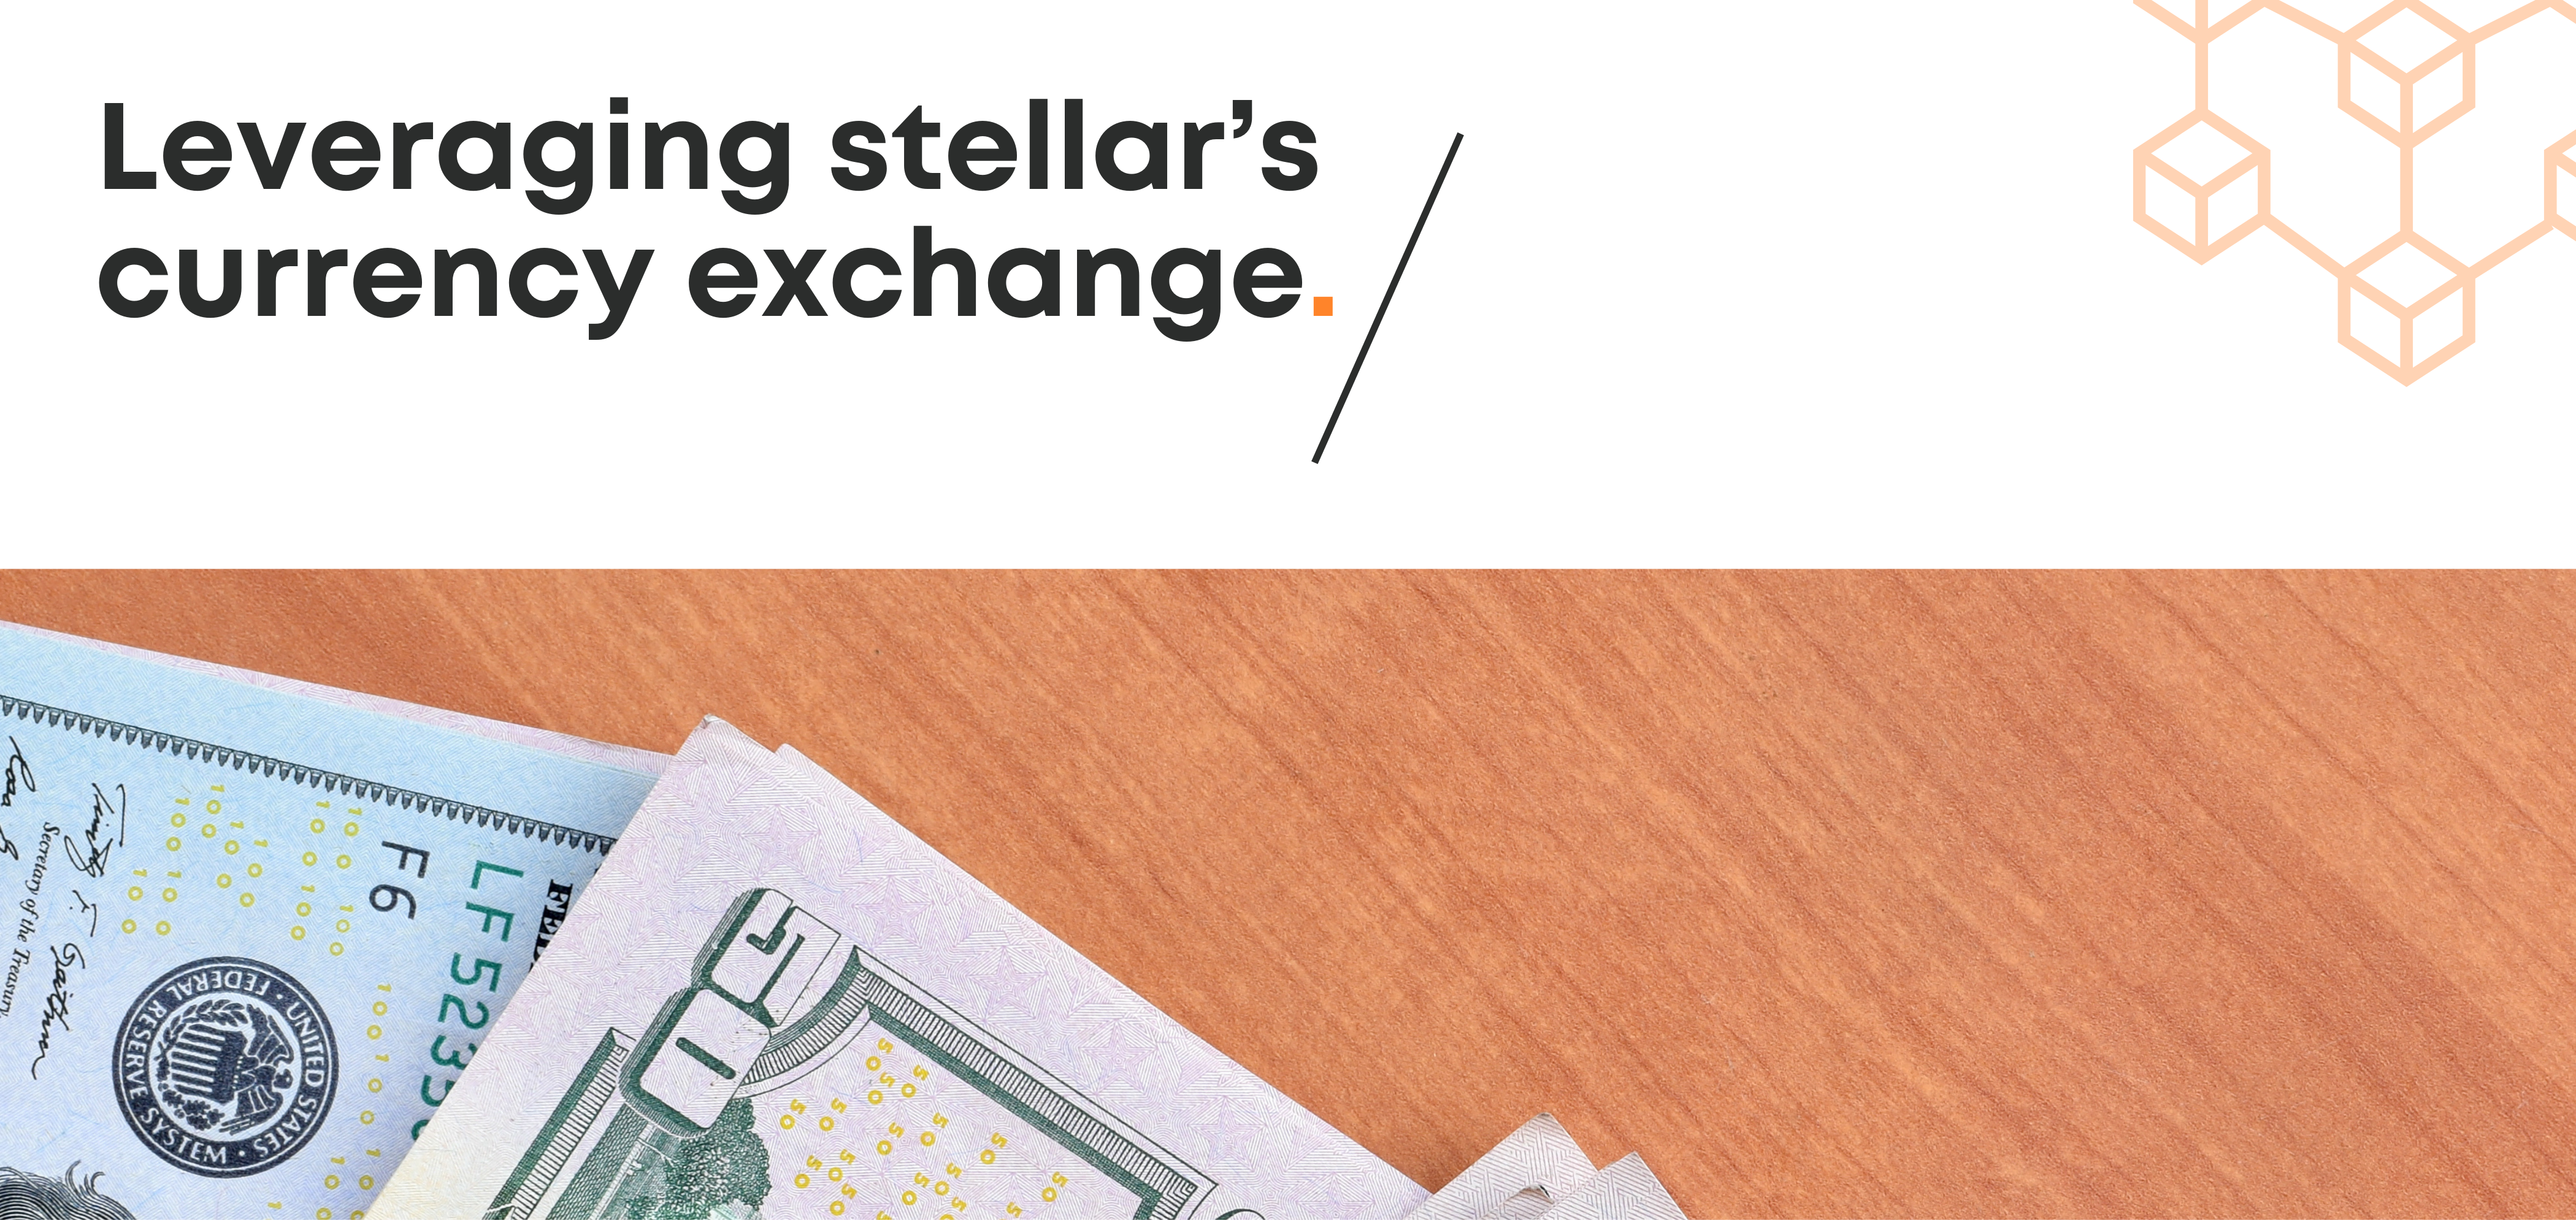 How DTransfer leverages Stellar’s decentralized currency exchange